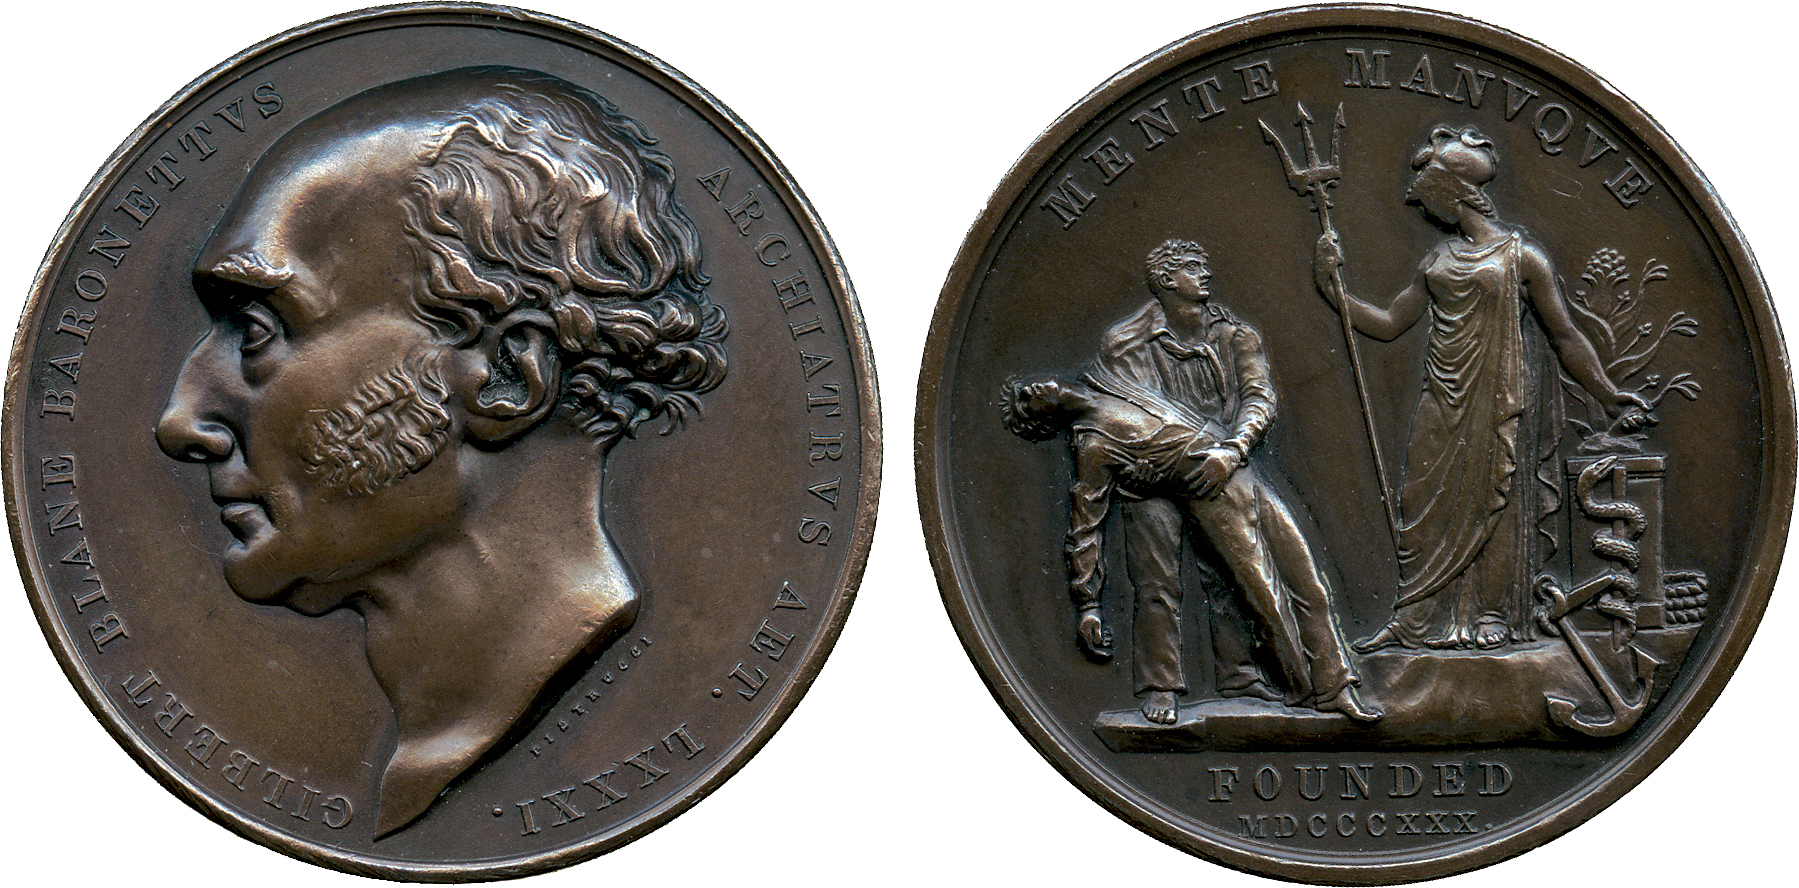 COMMEMORATIVE MEDALS, BRITISH MEDALS, Medals by Benetto Pistrucci (1783-1855), Sir Gilbert Blane (